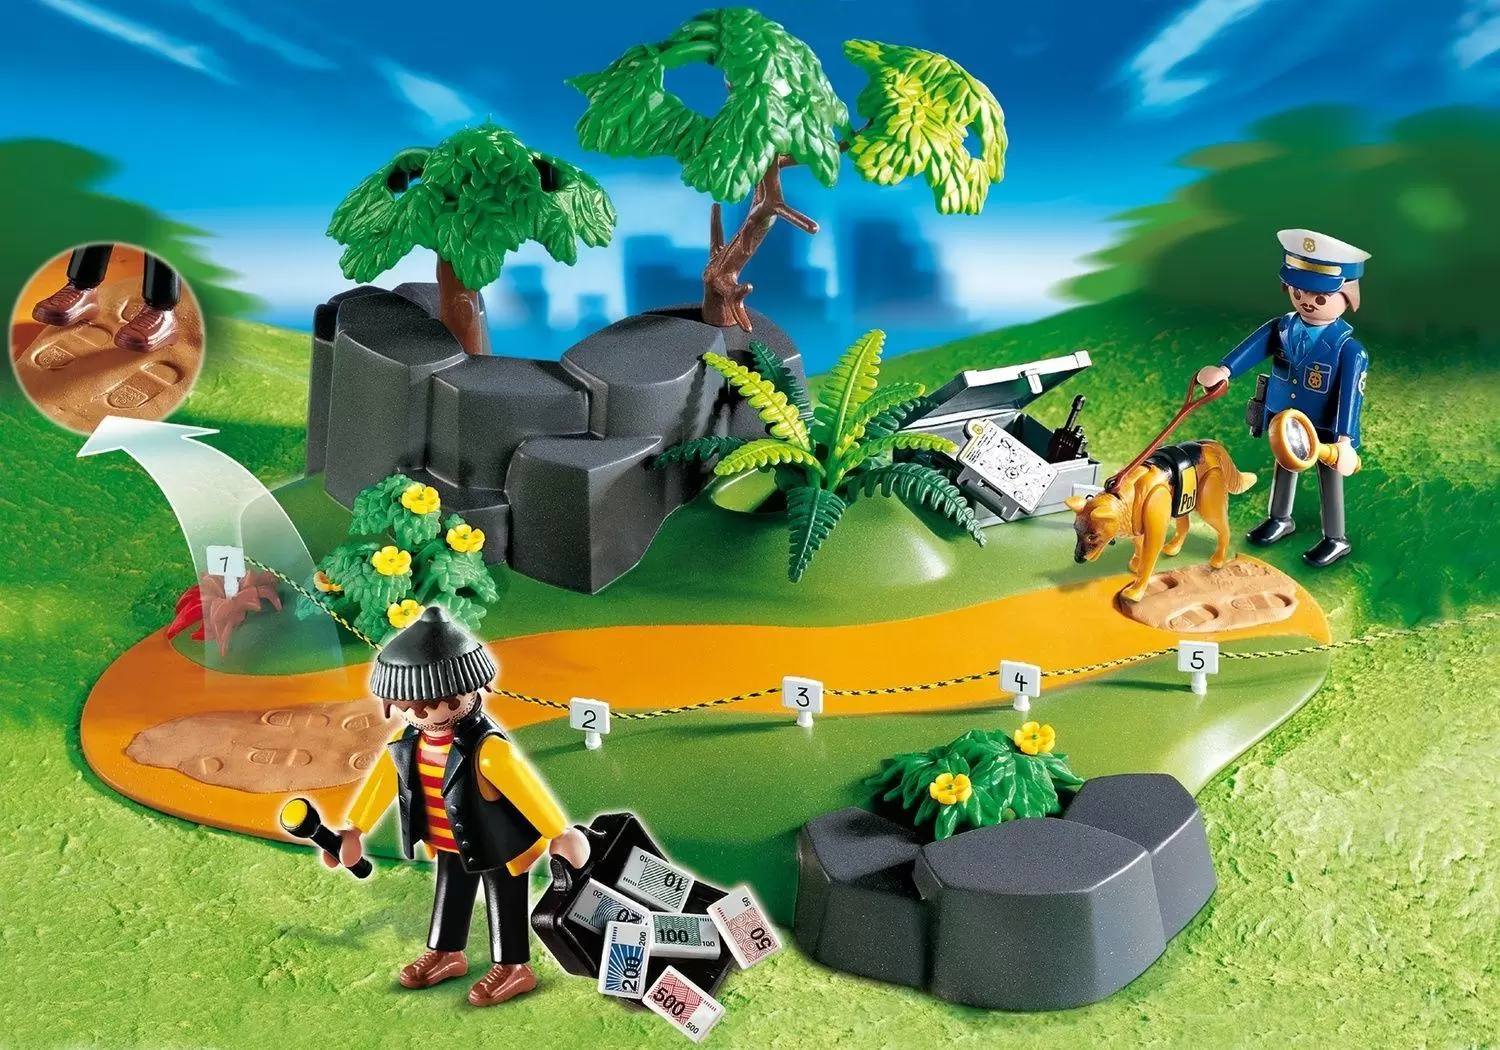 Police Playmobil - Police Superset